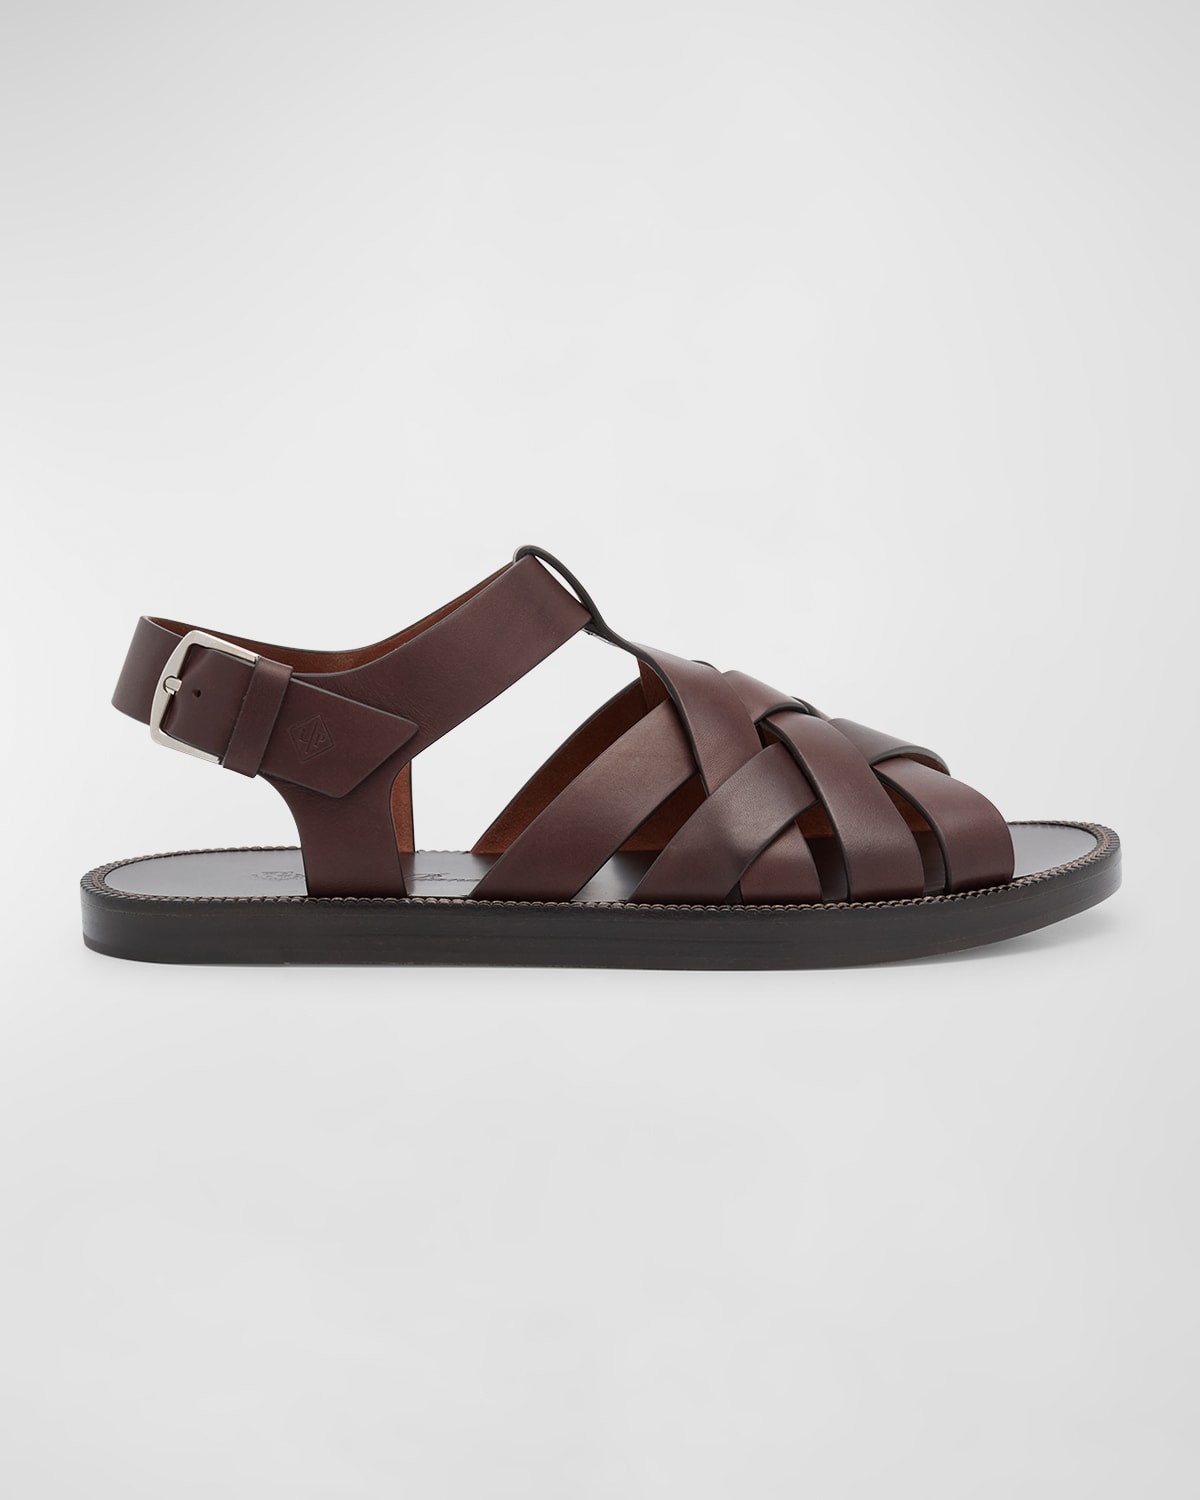 Men's Kumihimo Leather Sandals